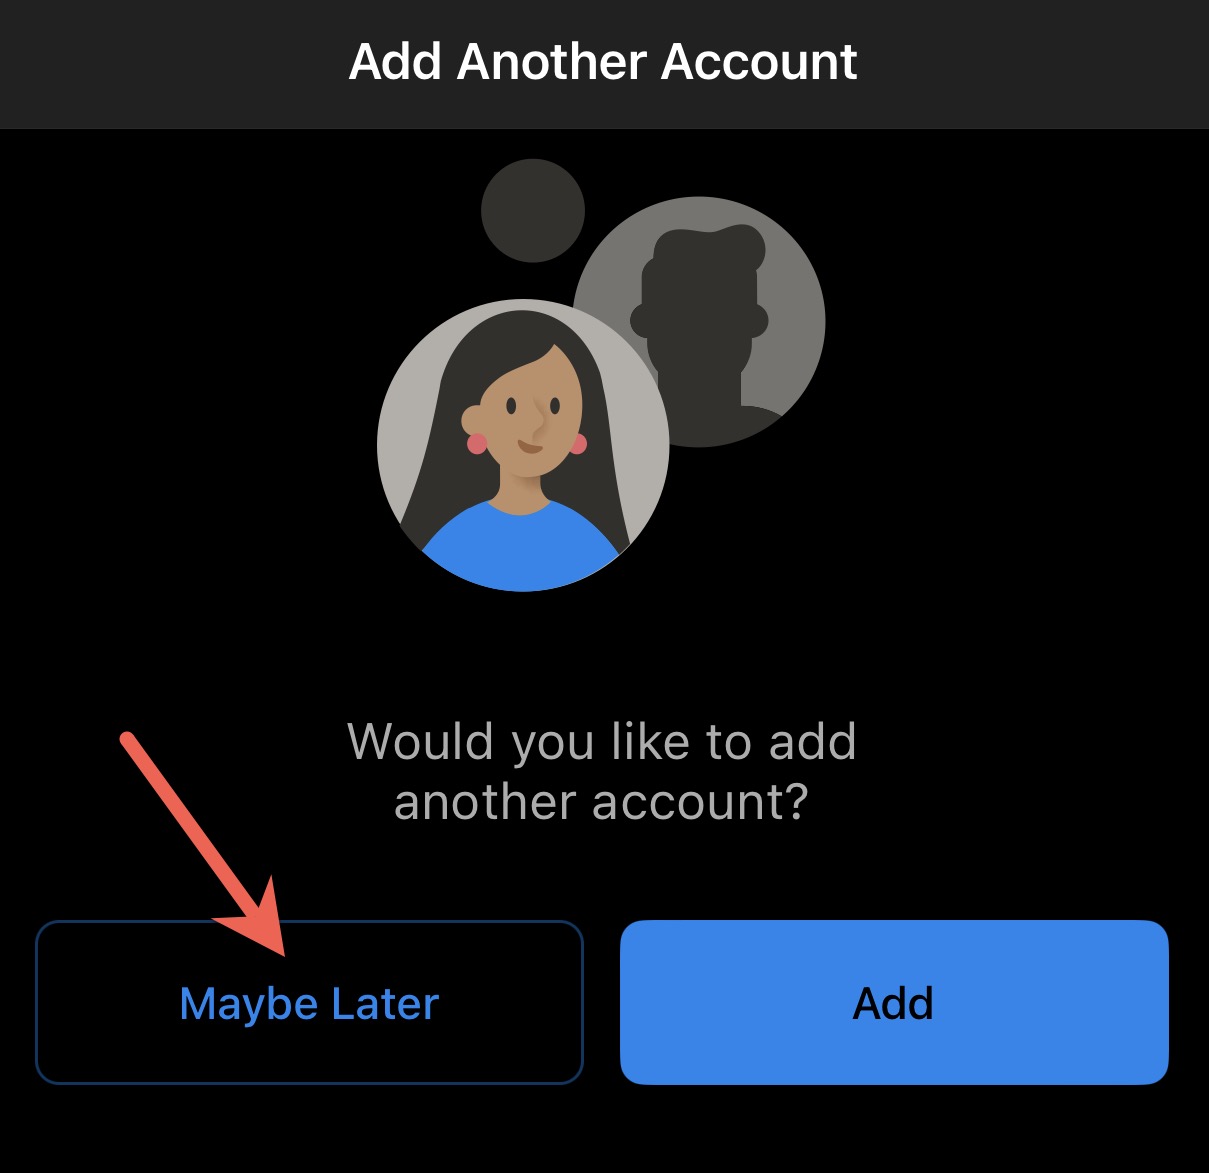 Add Another Account screen with Maybe Later button highlighted